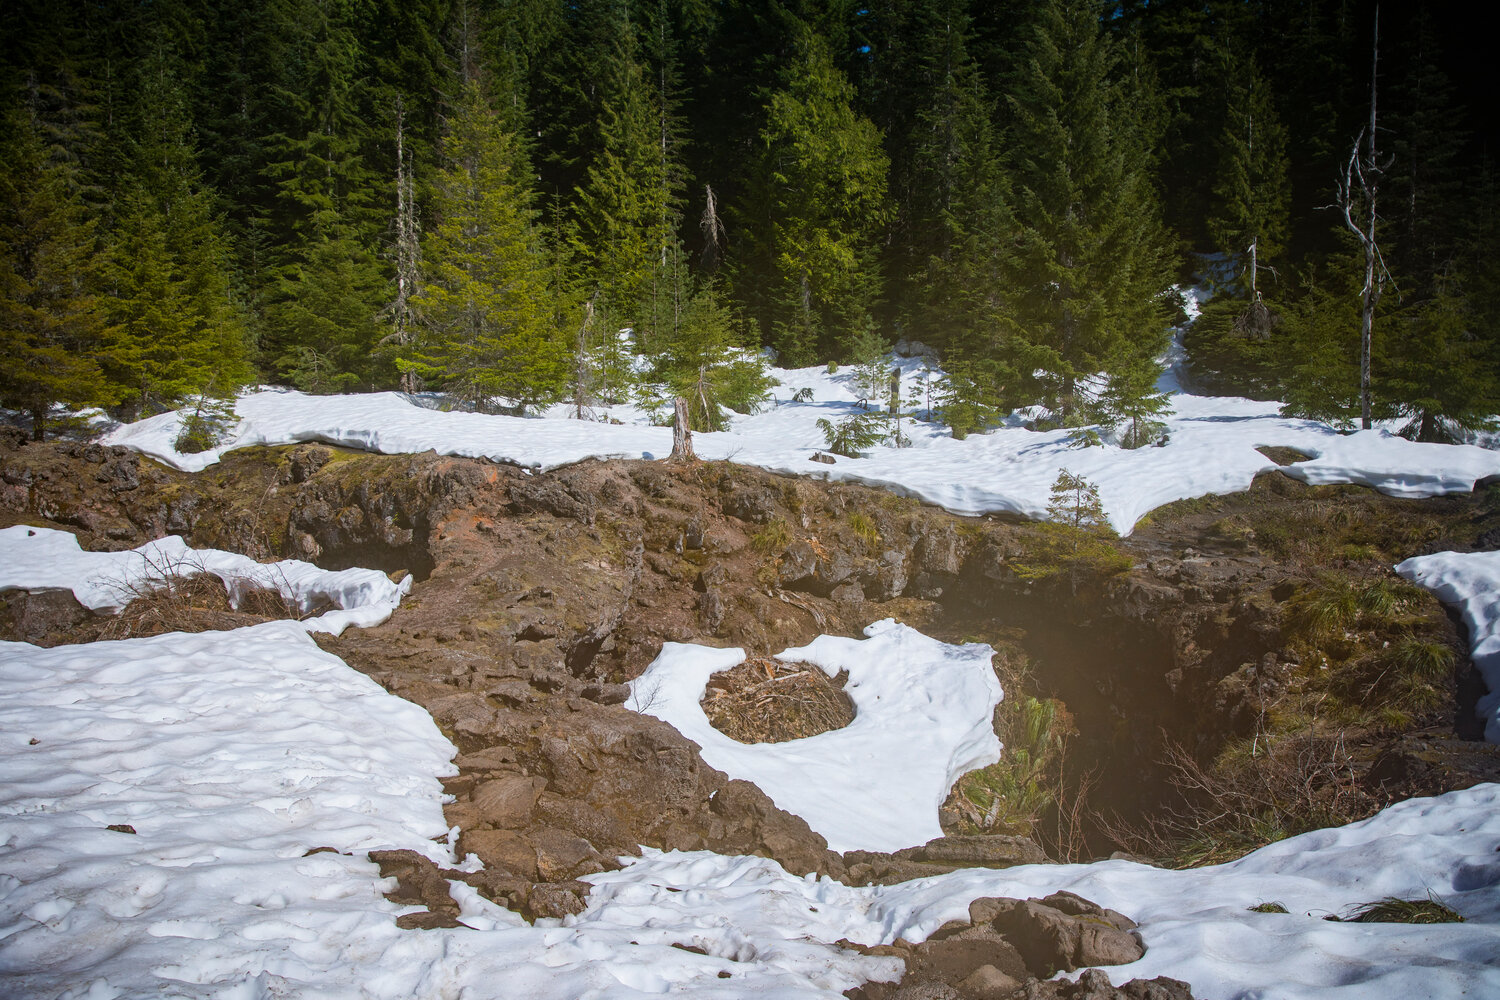 Snow blankets the ground around the upper entrance to the Ape Cave Interpretive Site in Cougar on opening day Thursday, May 18.